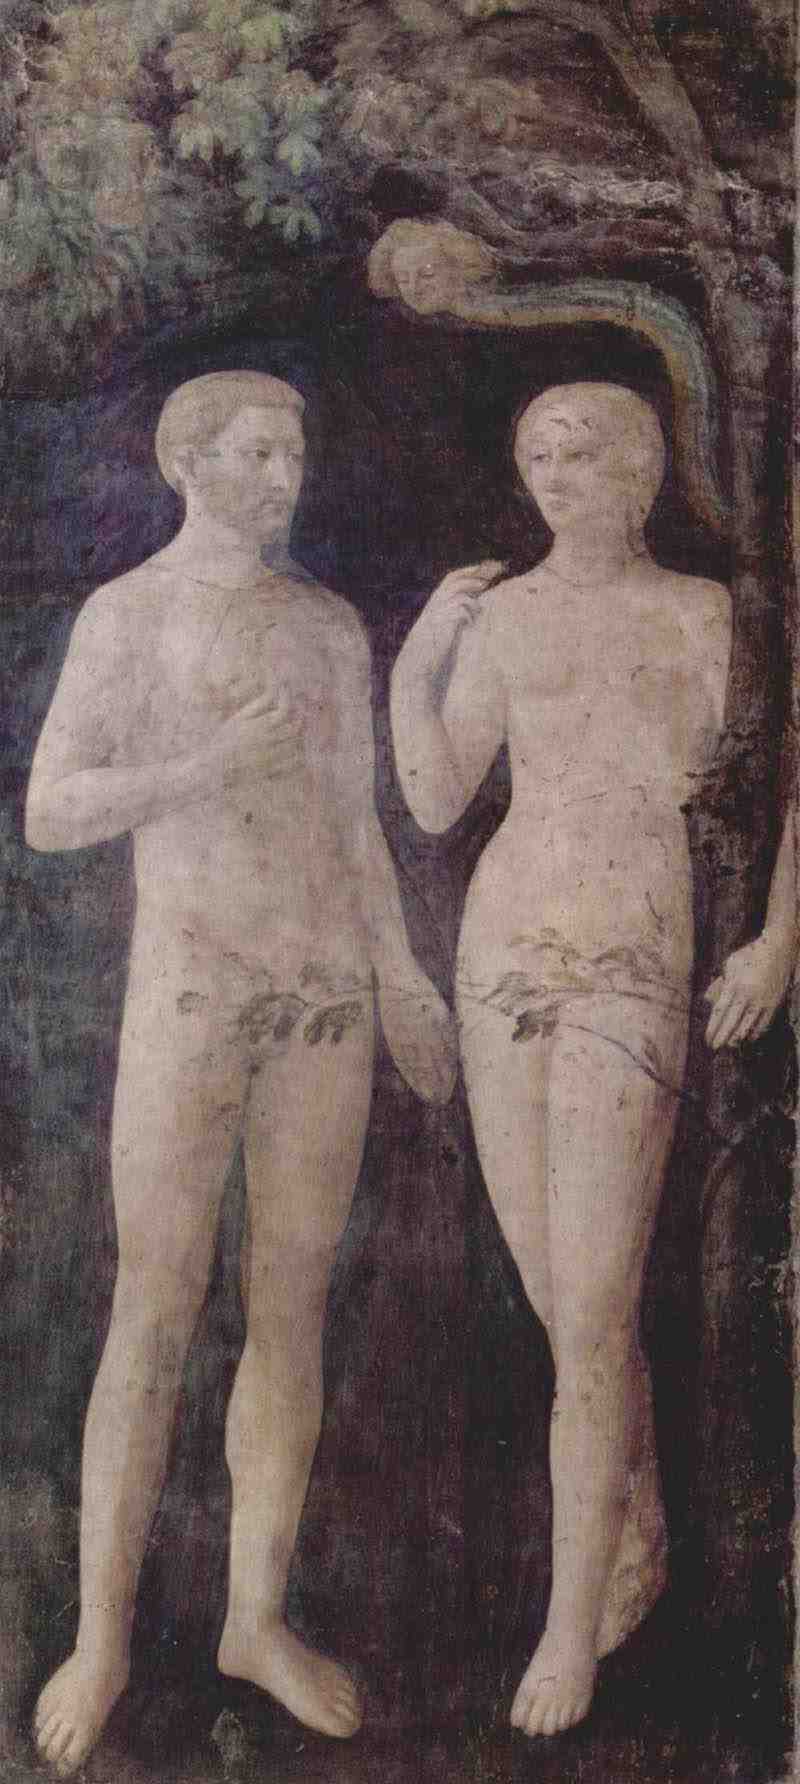 Frescoes of the Brancacci Chapel in Santa Maria del Carmine in Florence scenes from the life of Peter scene: The Temptation of Adam and Eve. Masolino